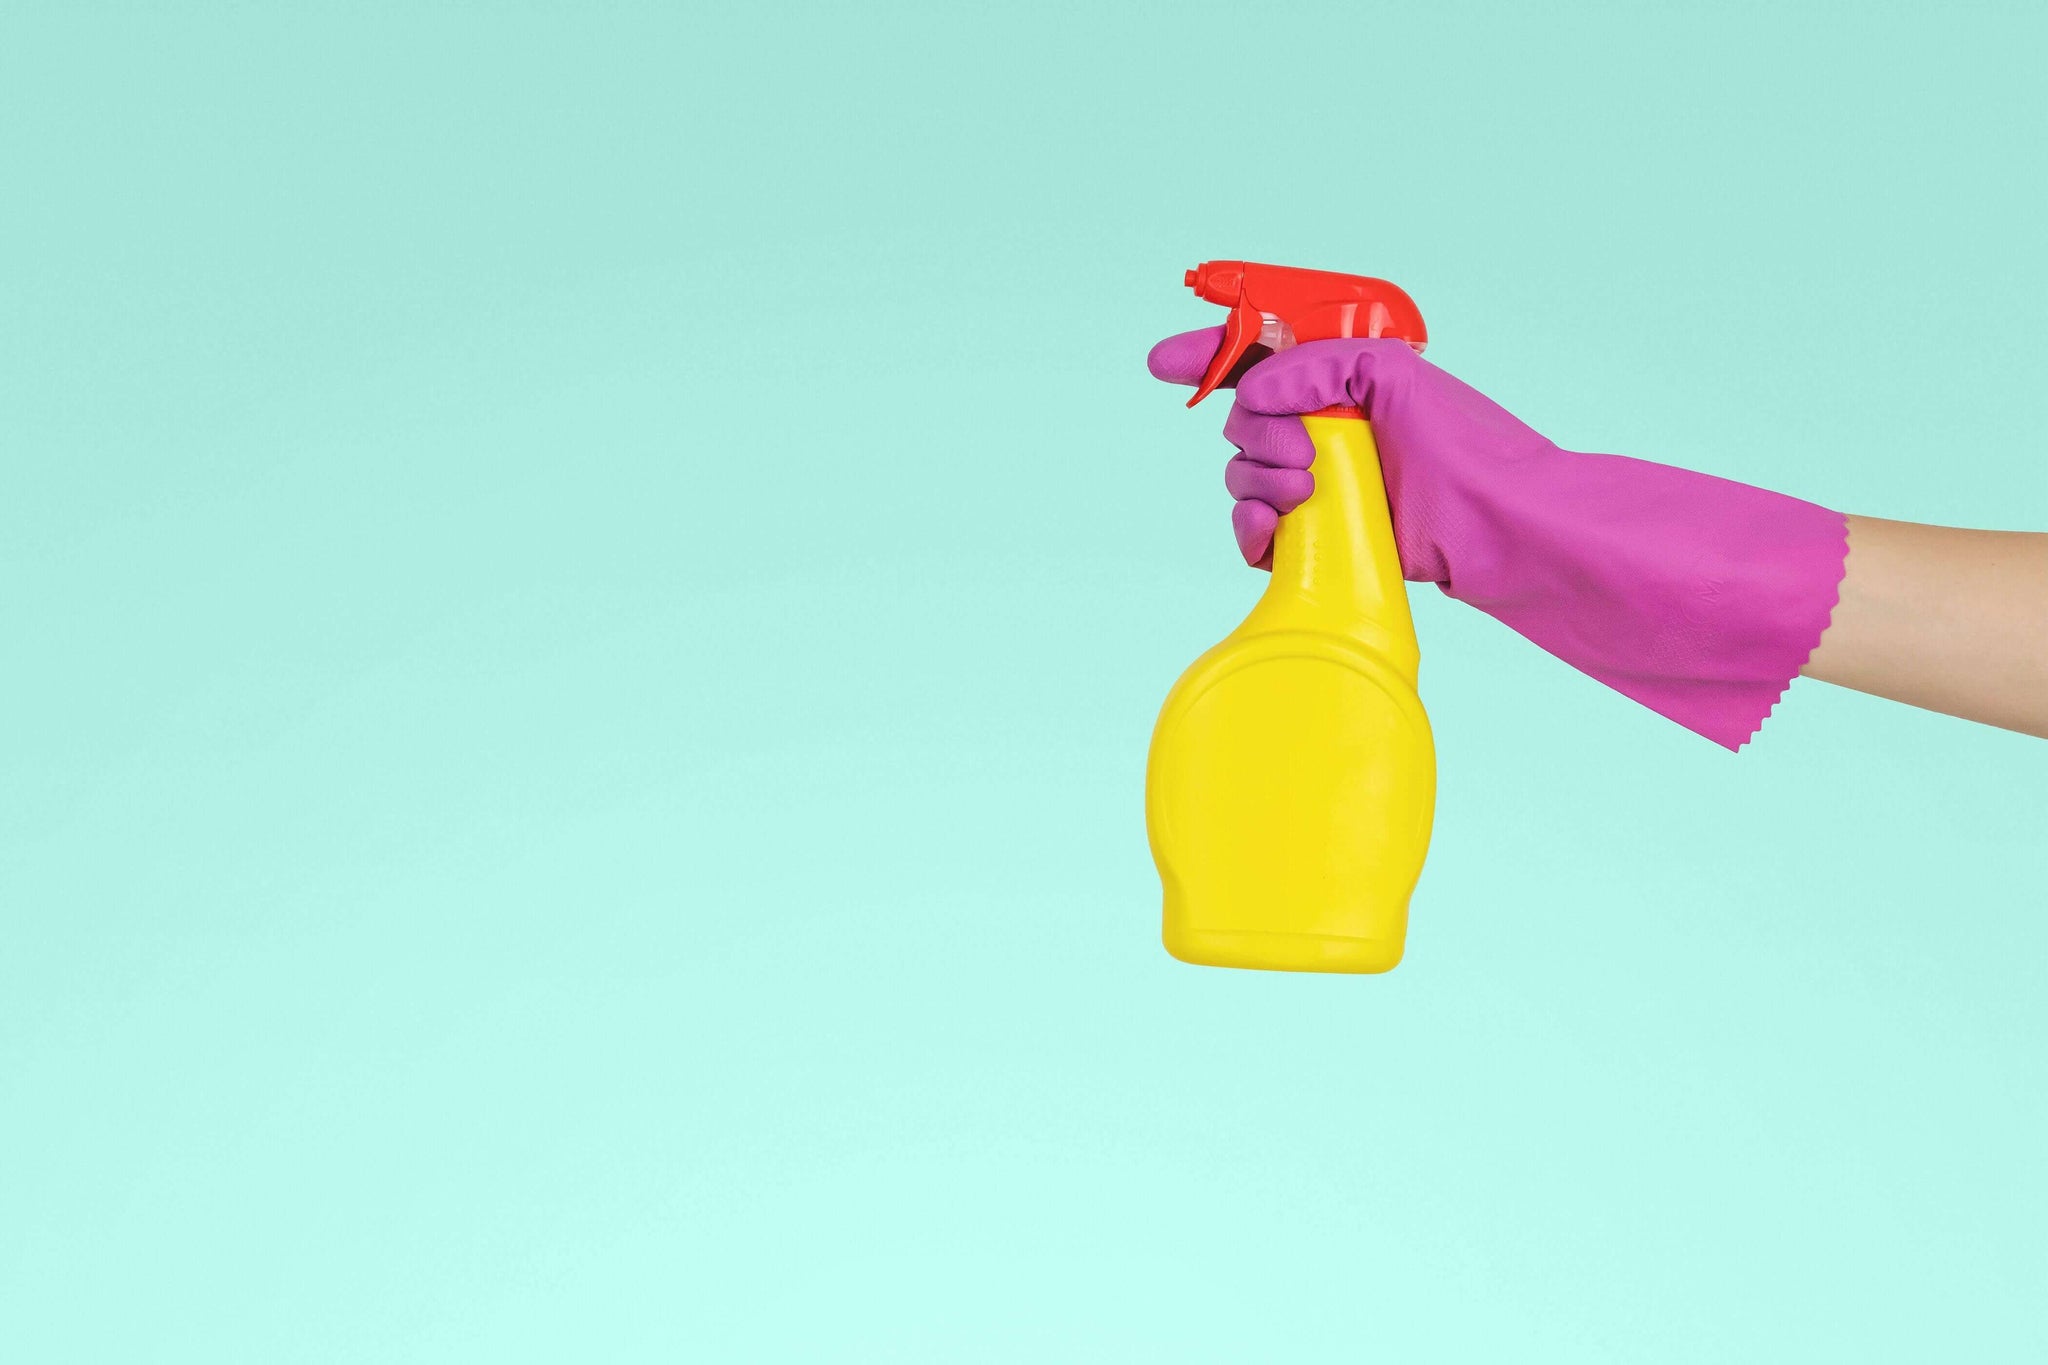 Holding a cleaning spray with pink marigolds